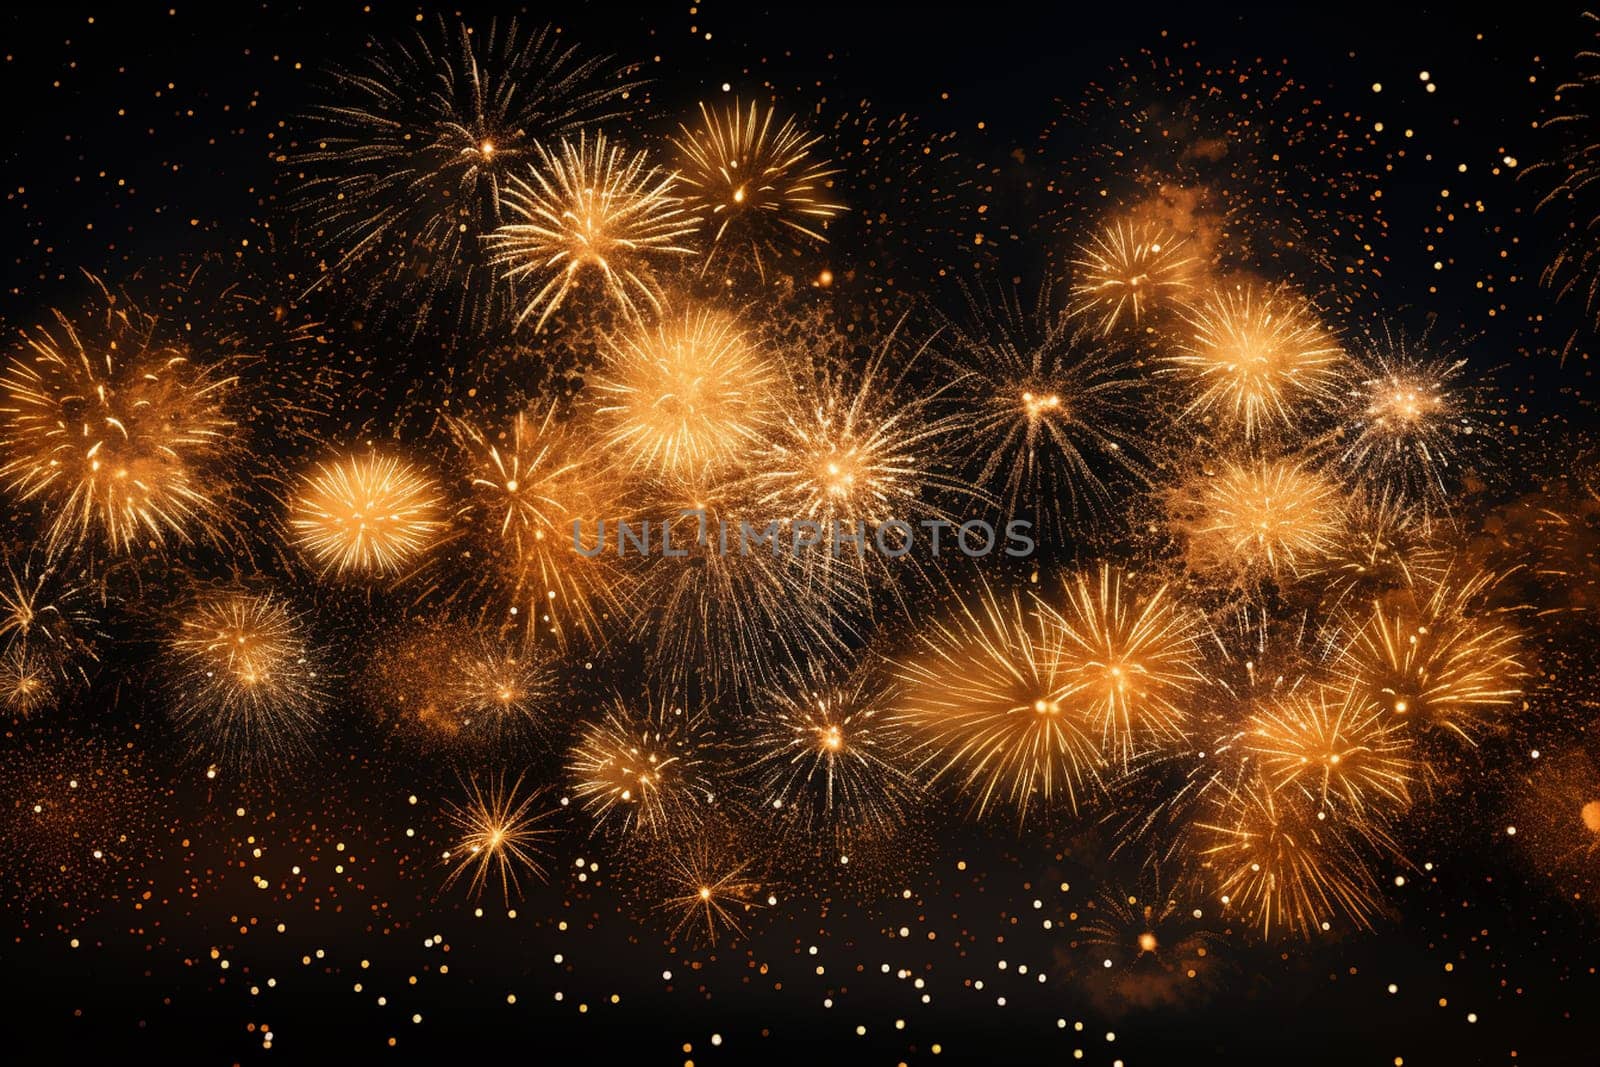 Elegant gold and black background with fireworks and light sparkles. Background for birthday celebrations, big events, congratulations and holidays like 4th of July or New Year's Eve by Andelov13